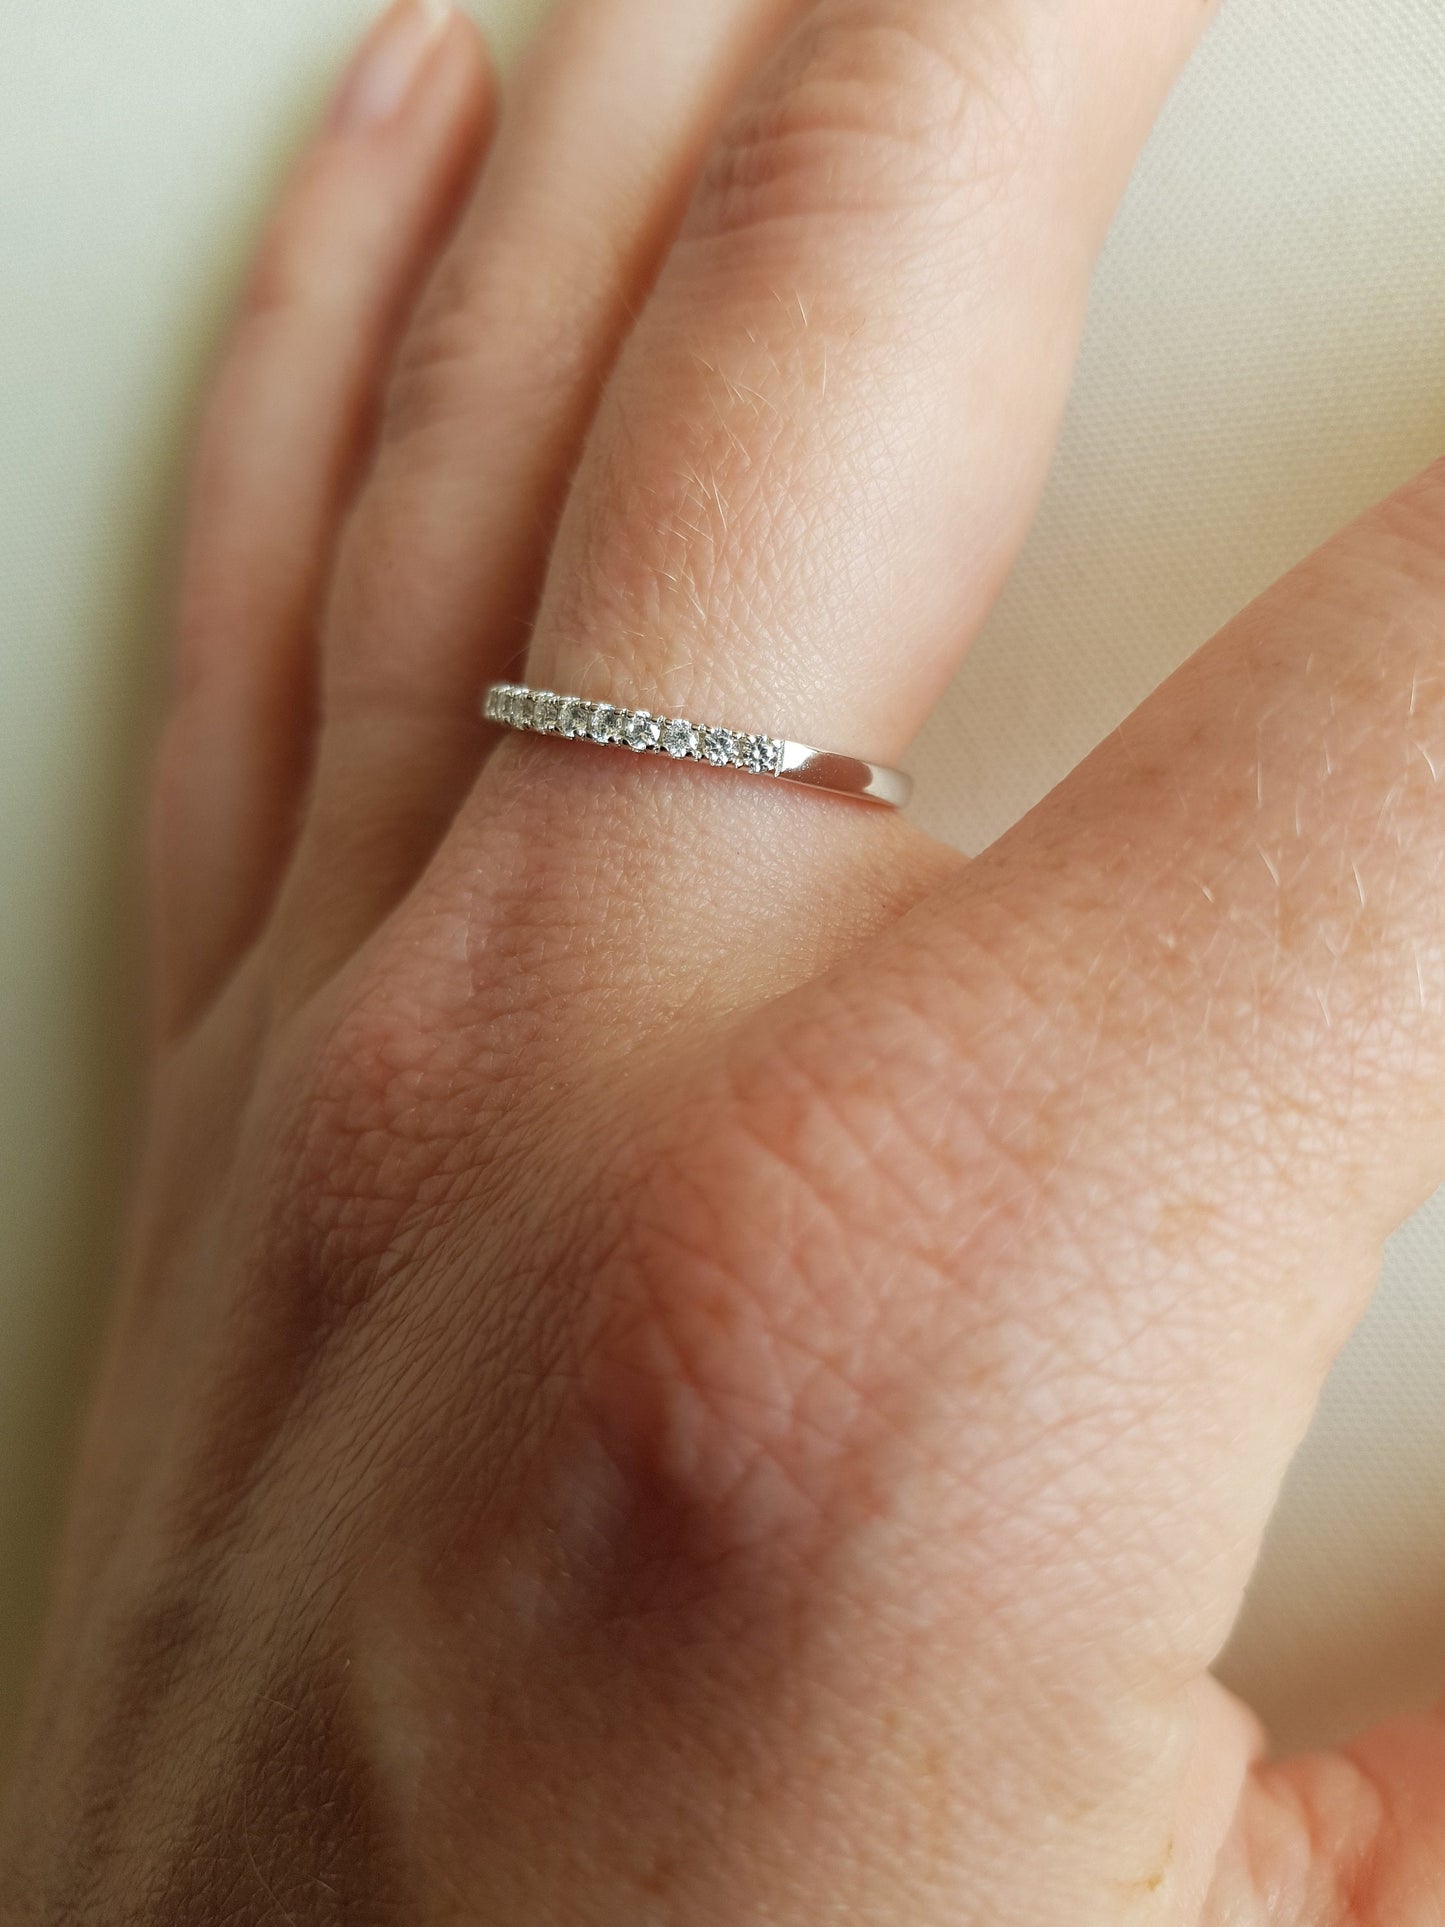 1.8mm wide Man Made Moissanite Half Eternity ring  in white gold, titanium, or Silver